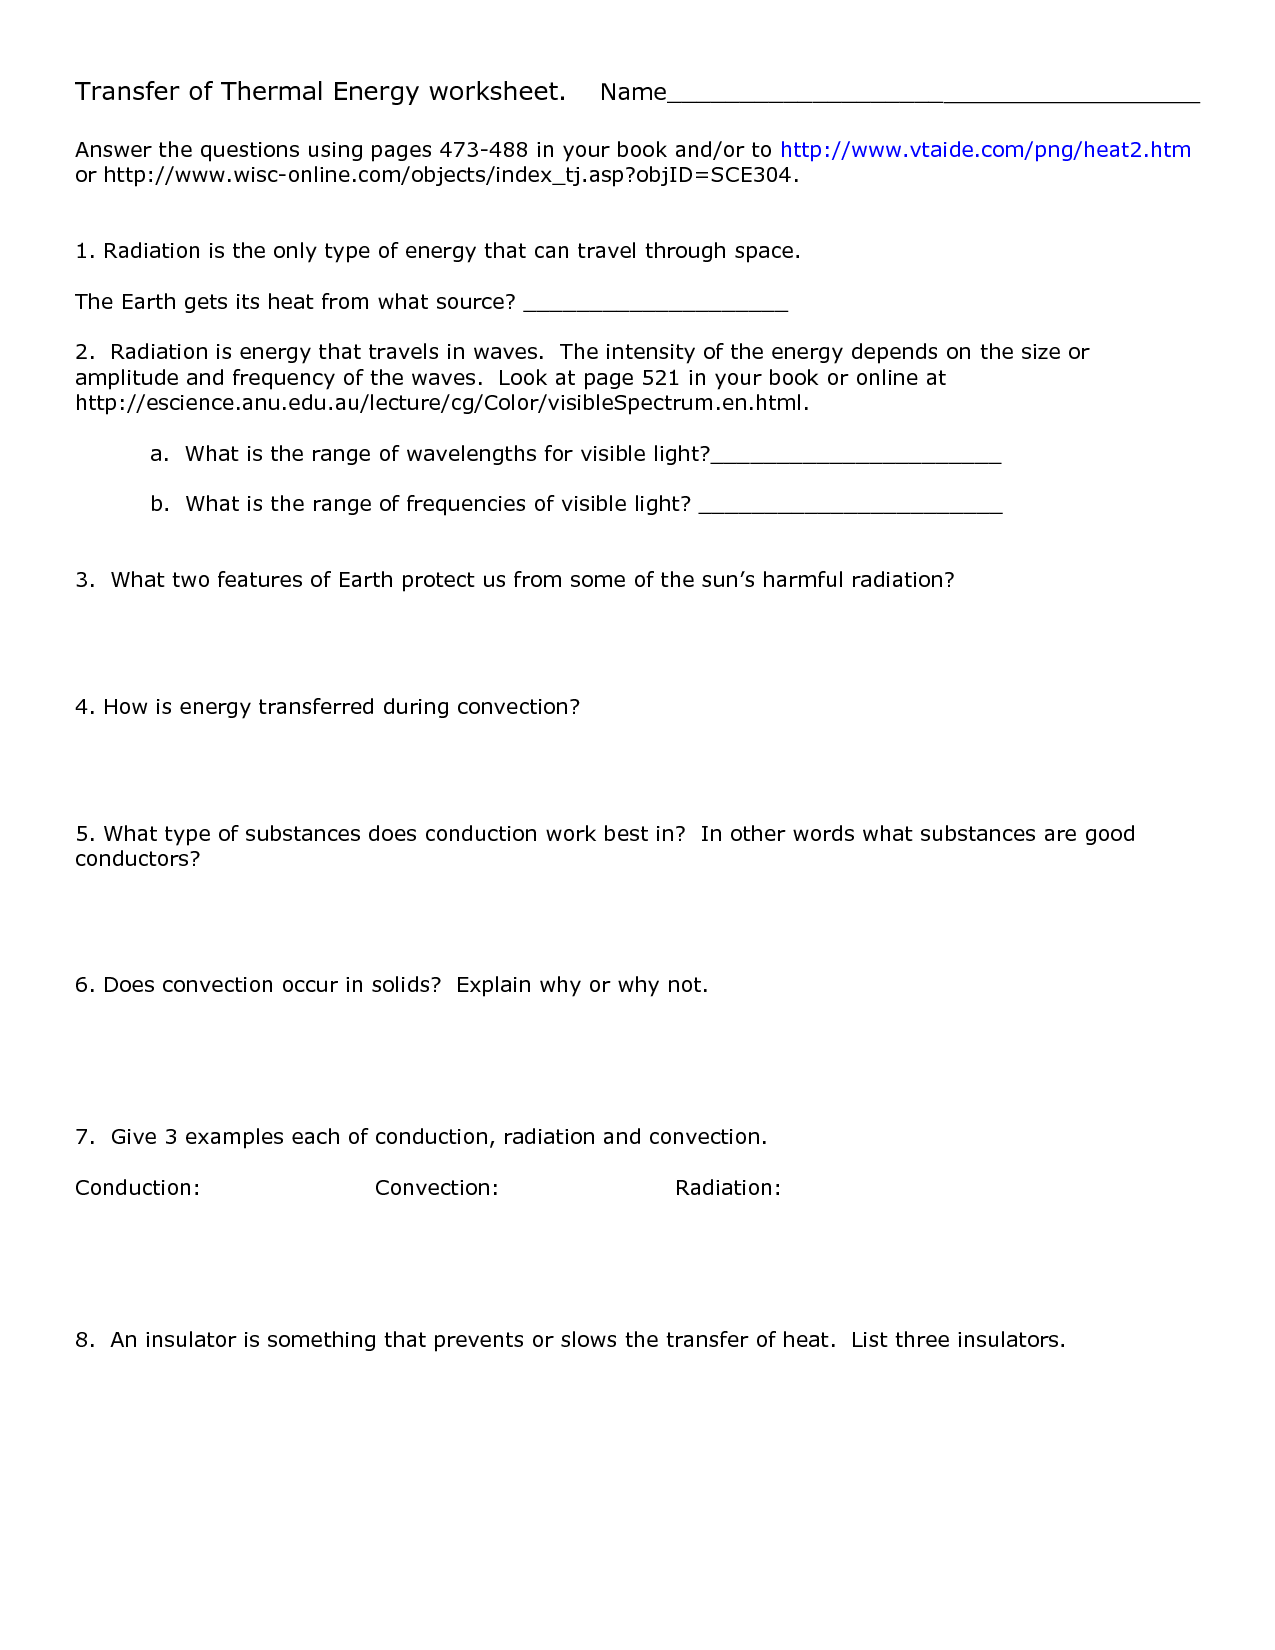 19 Images of Thermal Energy Worksheet Answers